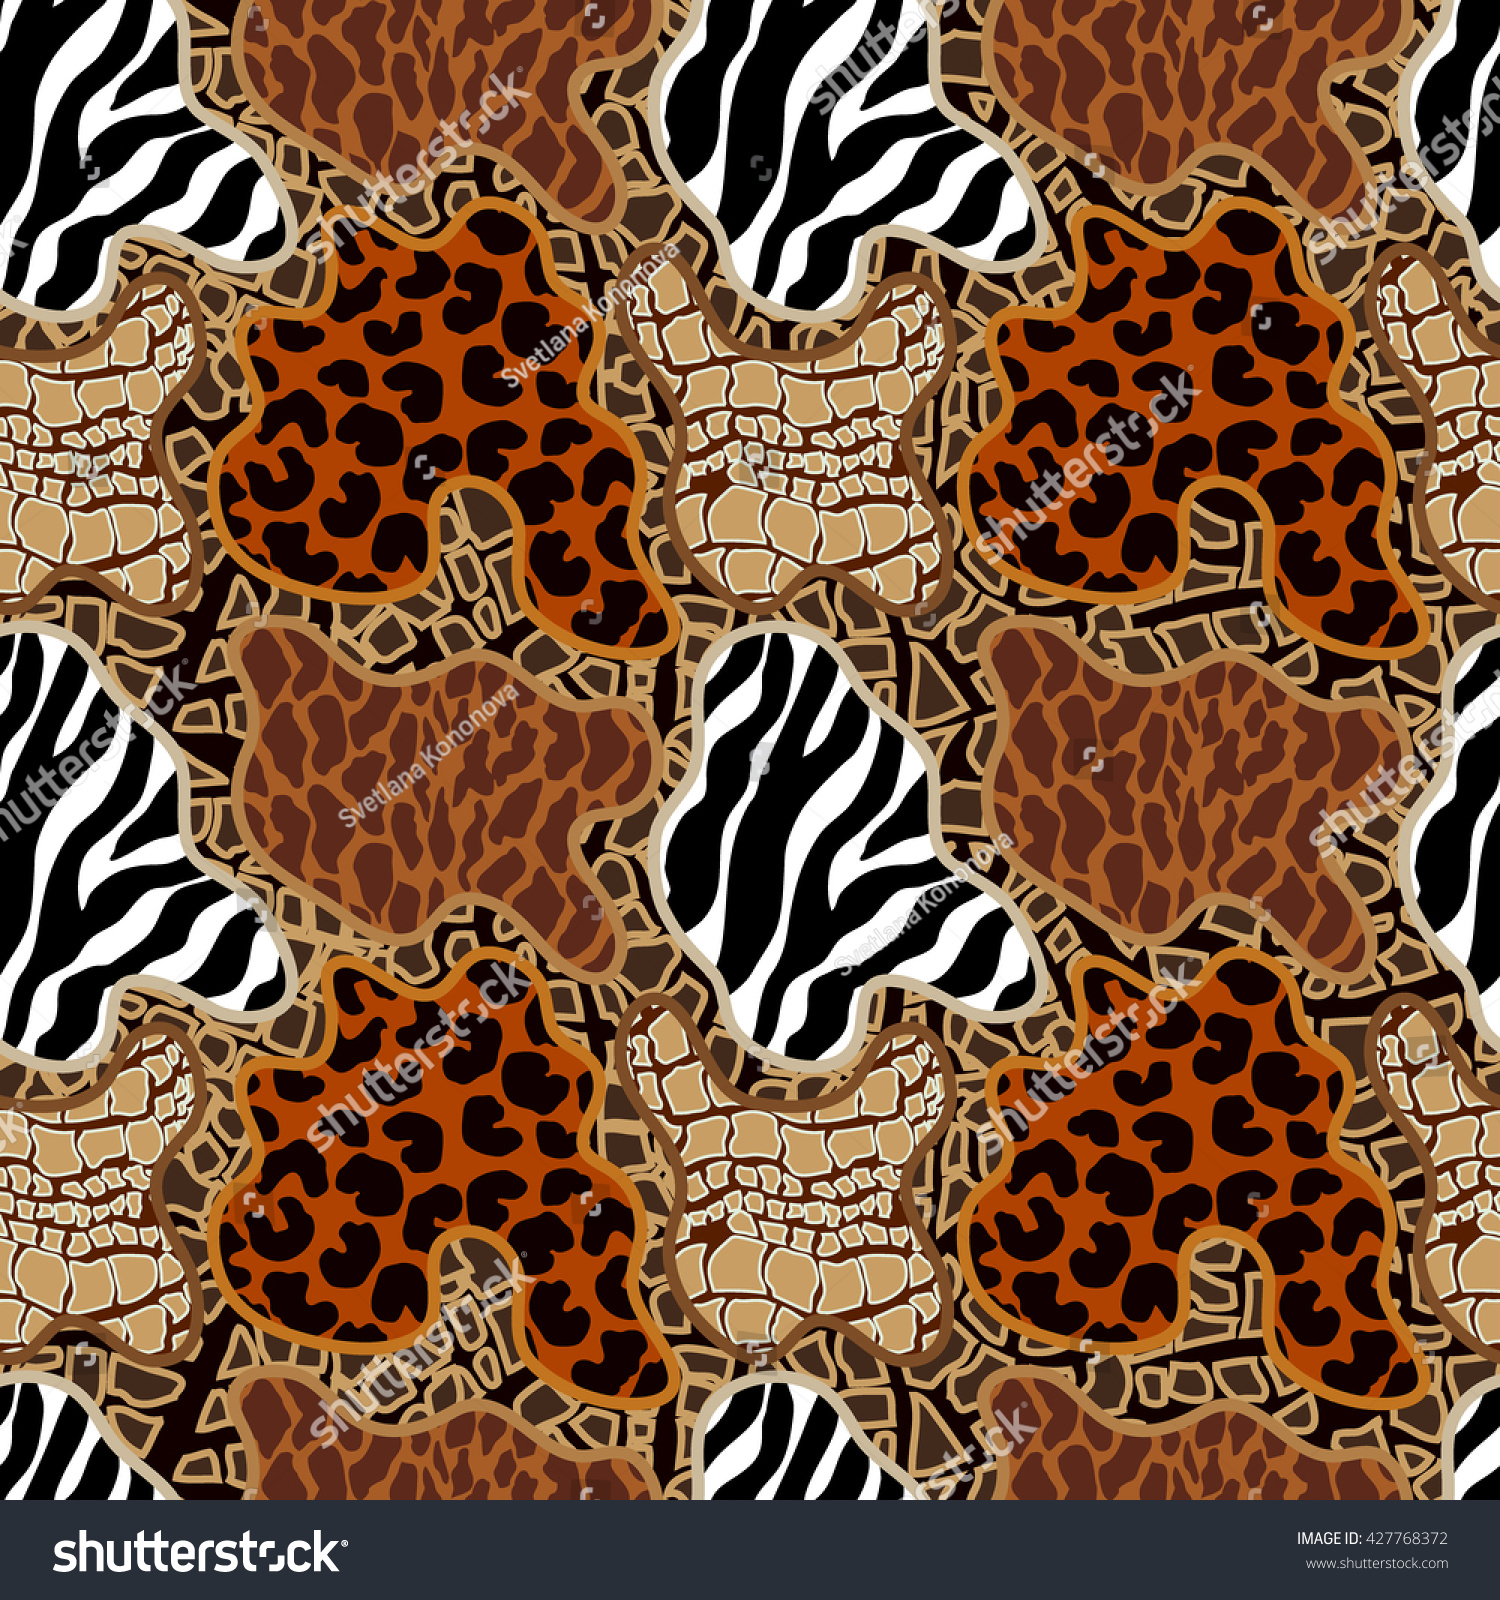 Download Animals With Stripes And Spots - Inspec Wallp Animals